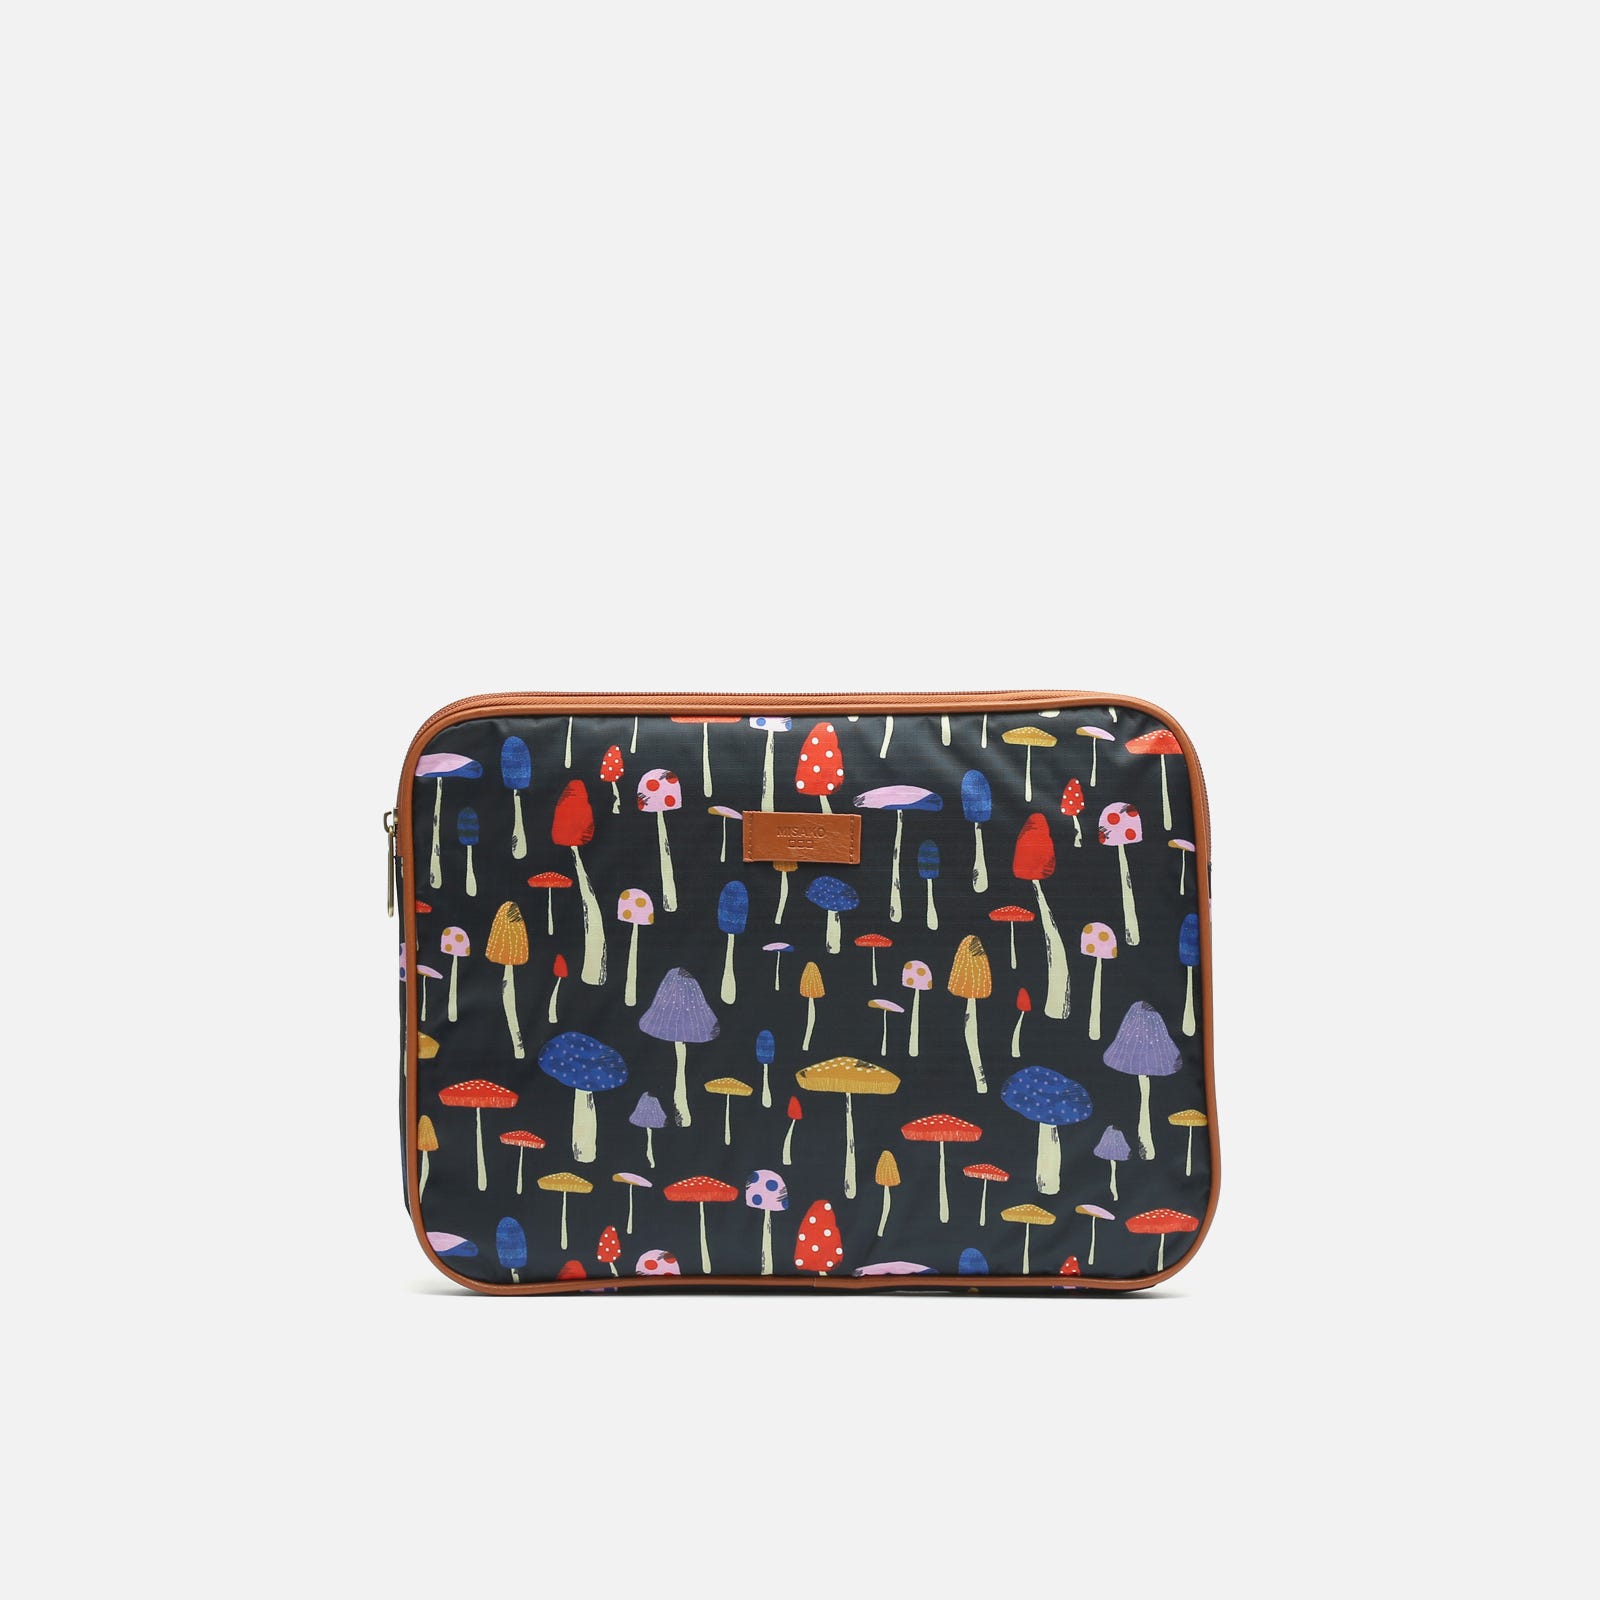 Small laptop case (13 inches)